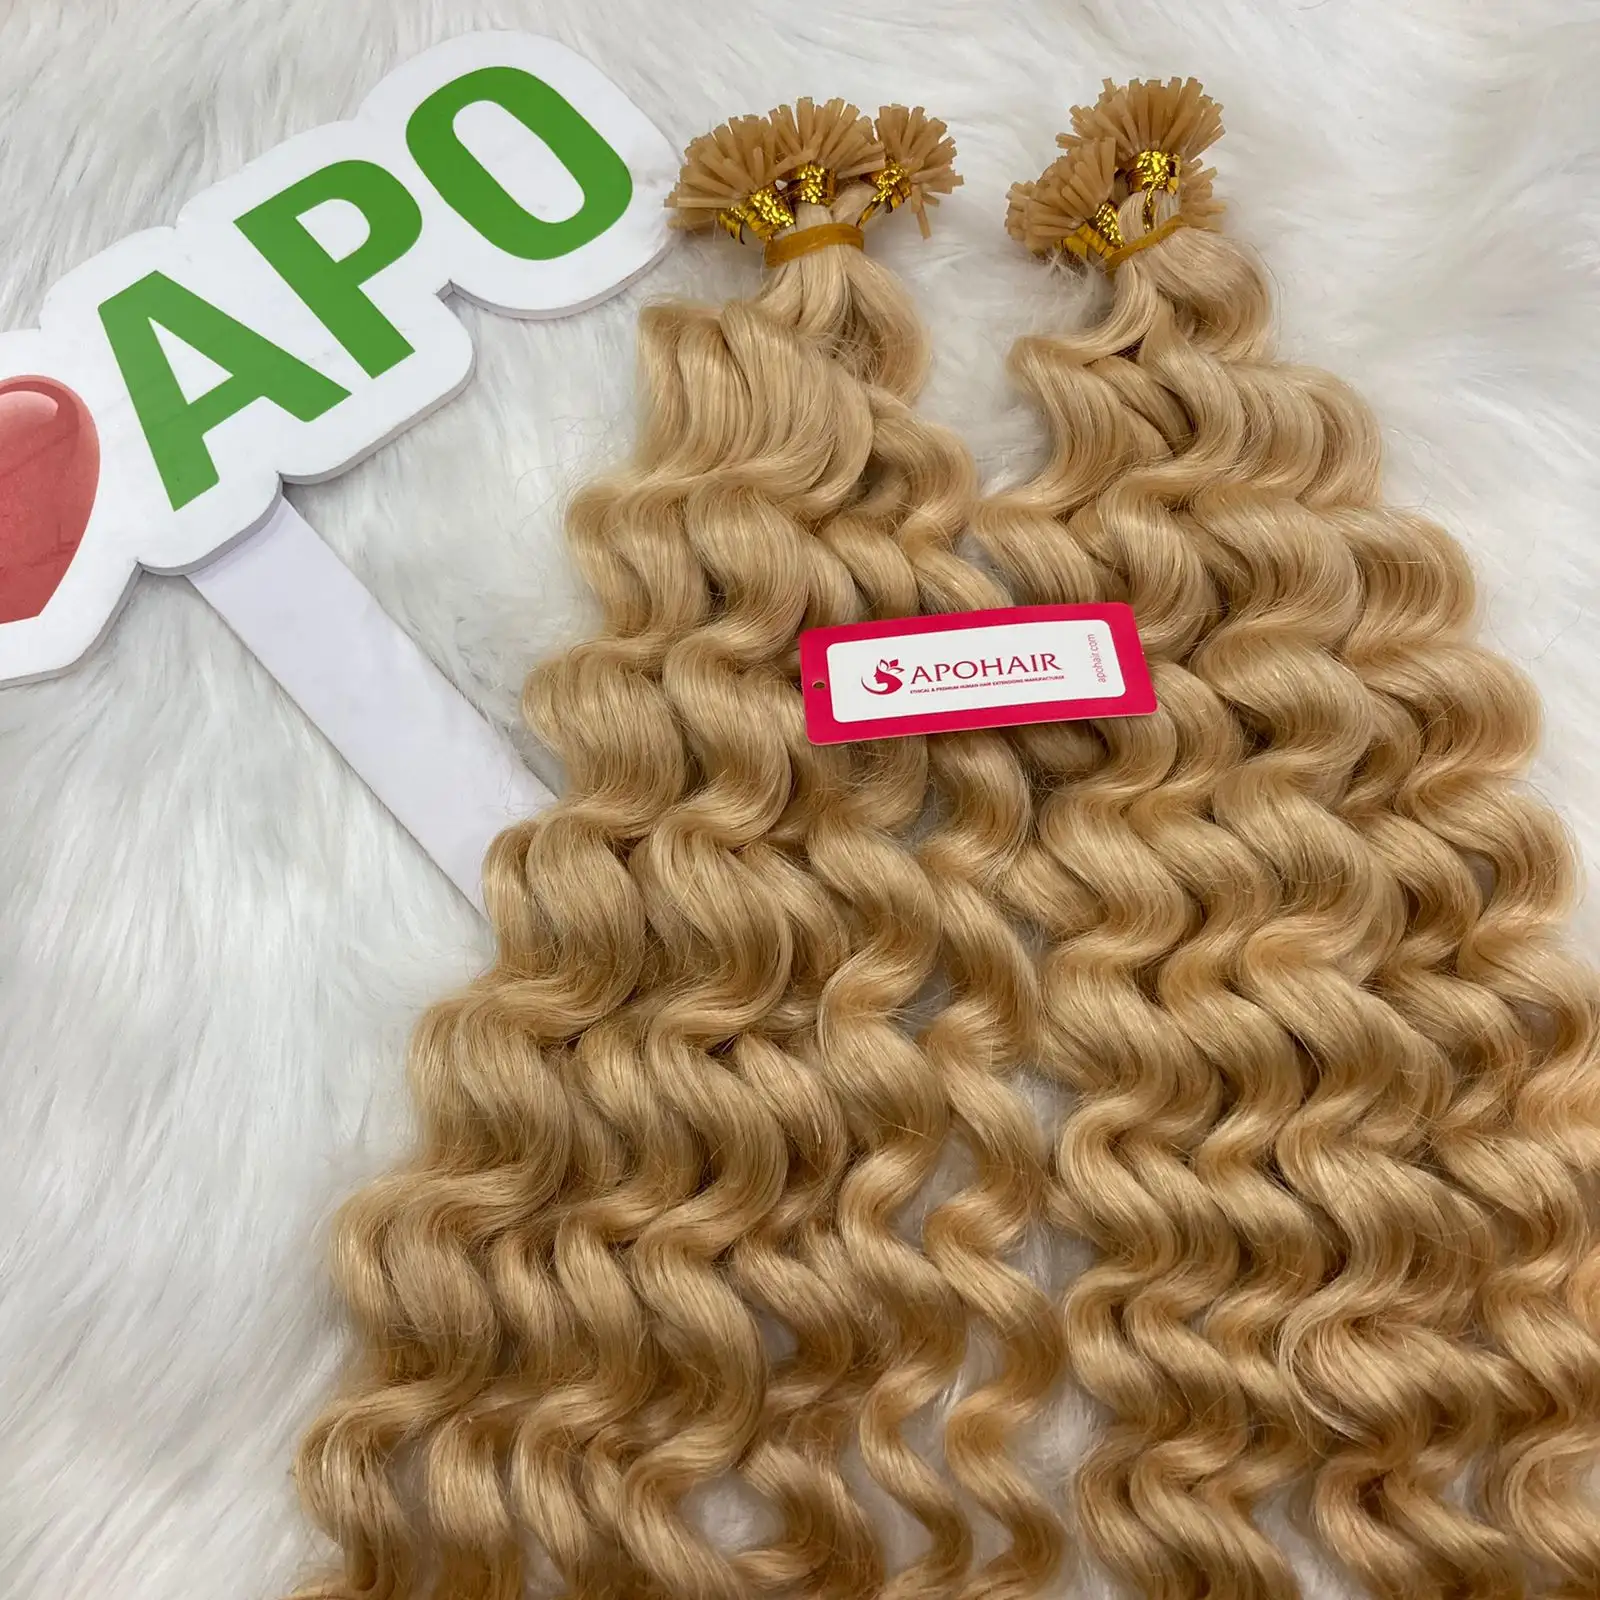 HOT SELLING DOUBLE DRAWN I TIP HAIR EXTENSIONS BROWN BLONDE #613 BODY WAVY CUTICLE ALIGNED VIETNAMESE HUMAN HAIR EXTENSIONS